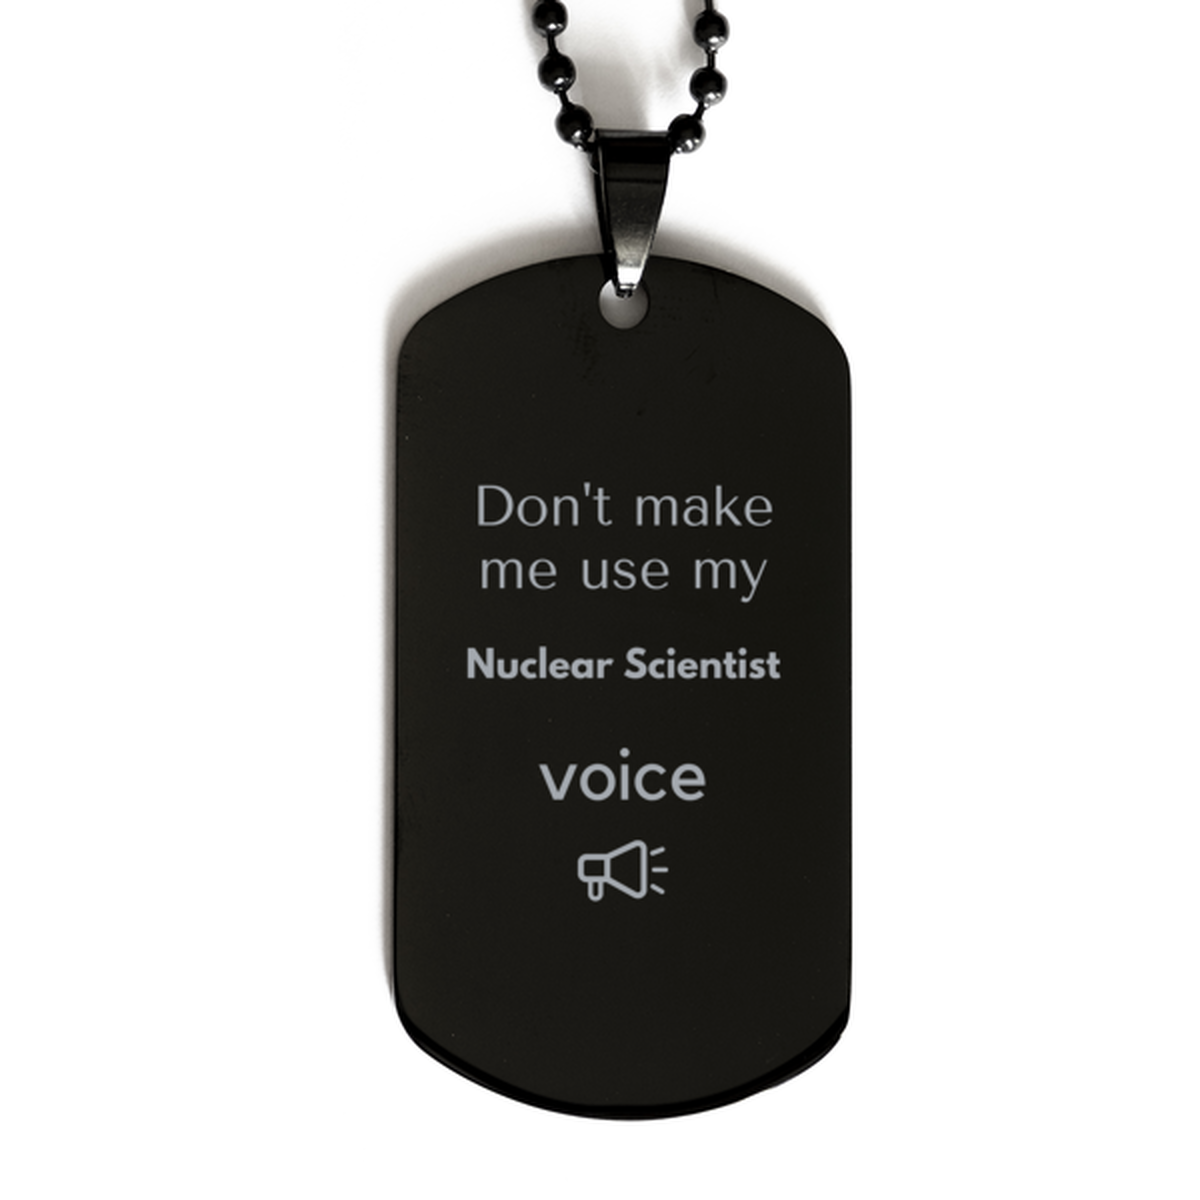 Don't make me use my Nuclear Scientist voice, Sarcasm Nuclear Scientist Gifts, Christmas Nuclear Scientist Black Dog Tag Birthday Unique Gifts For Nuclear Scientist Coworkers, Men, Women, Colleague, Friends